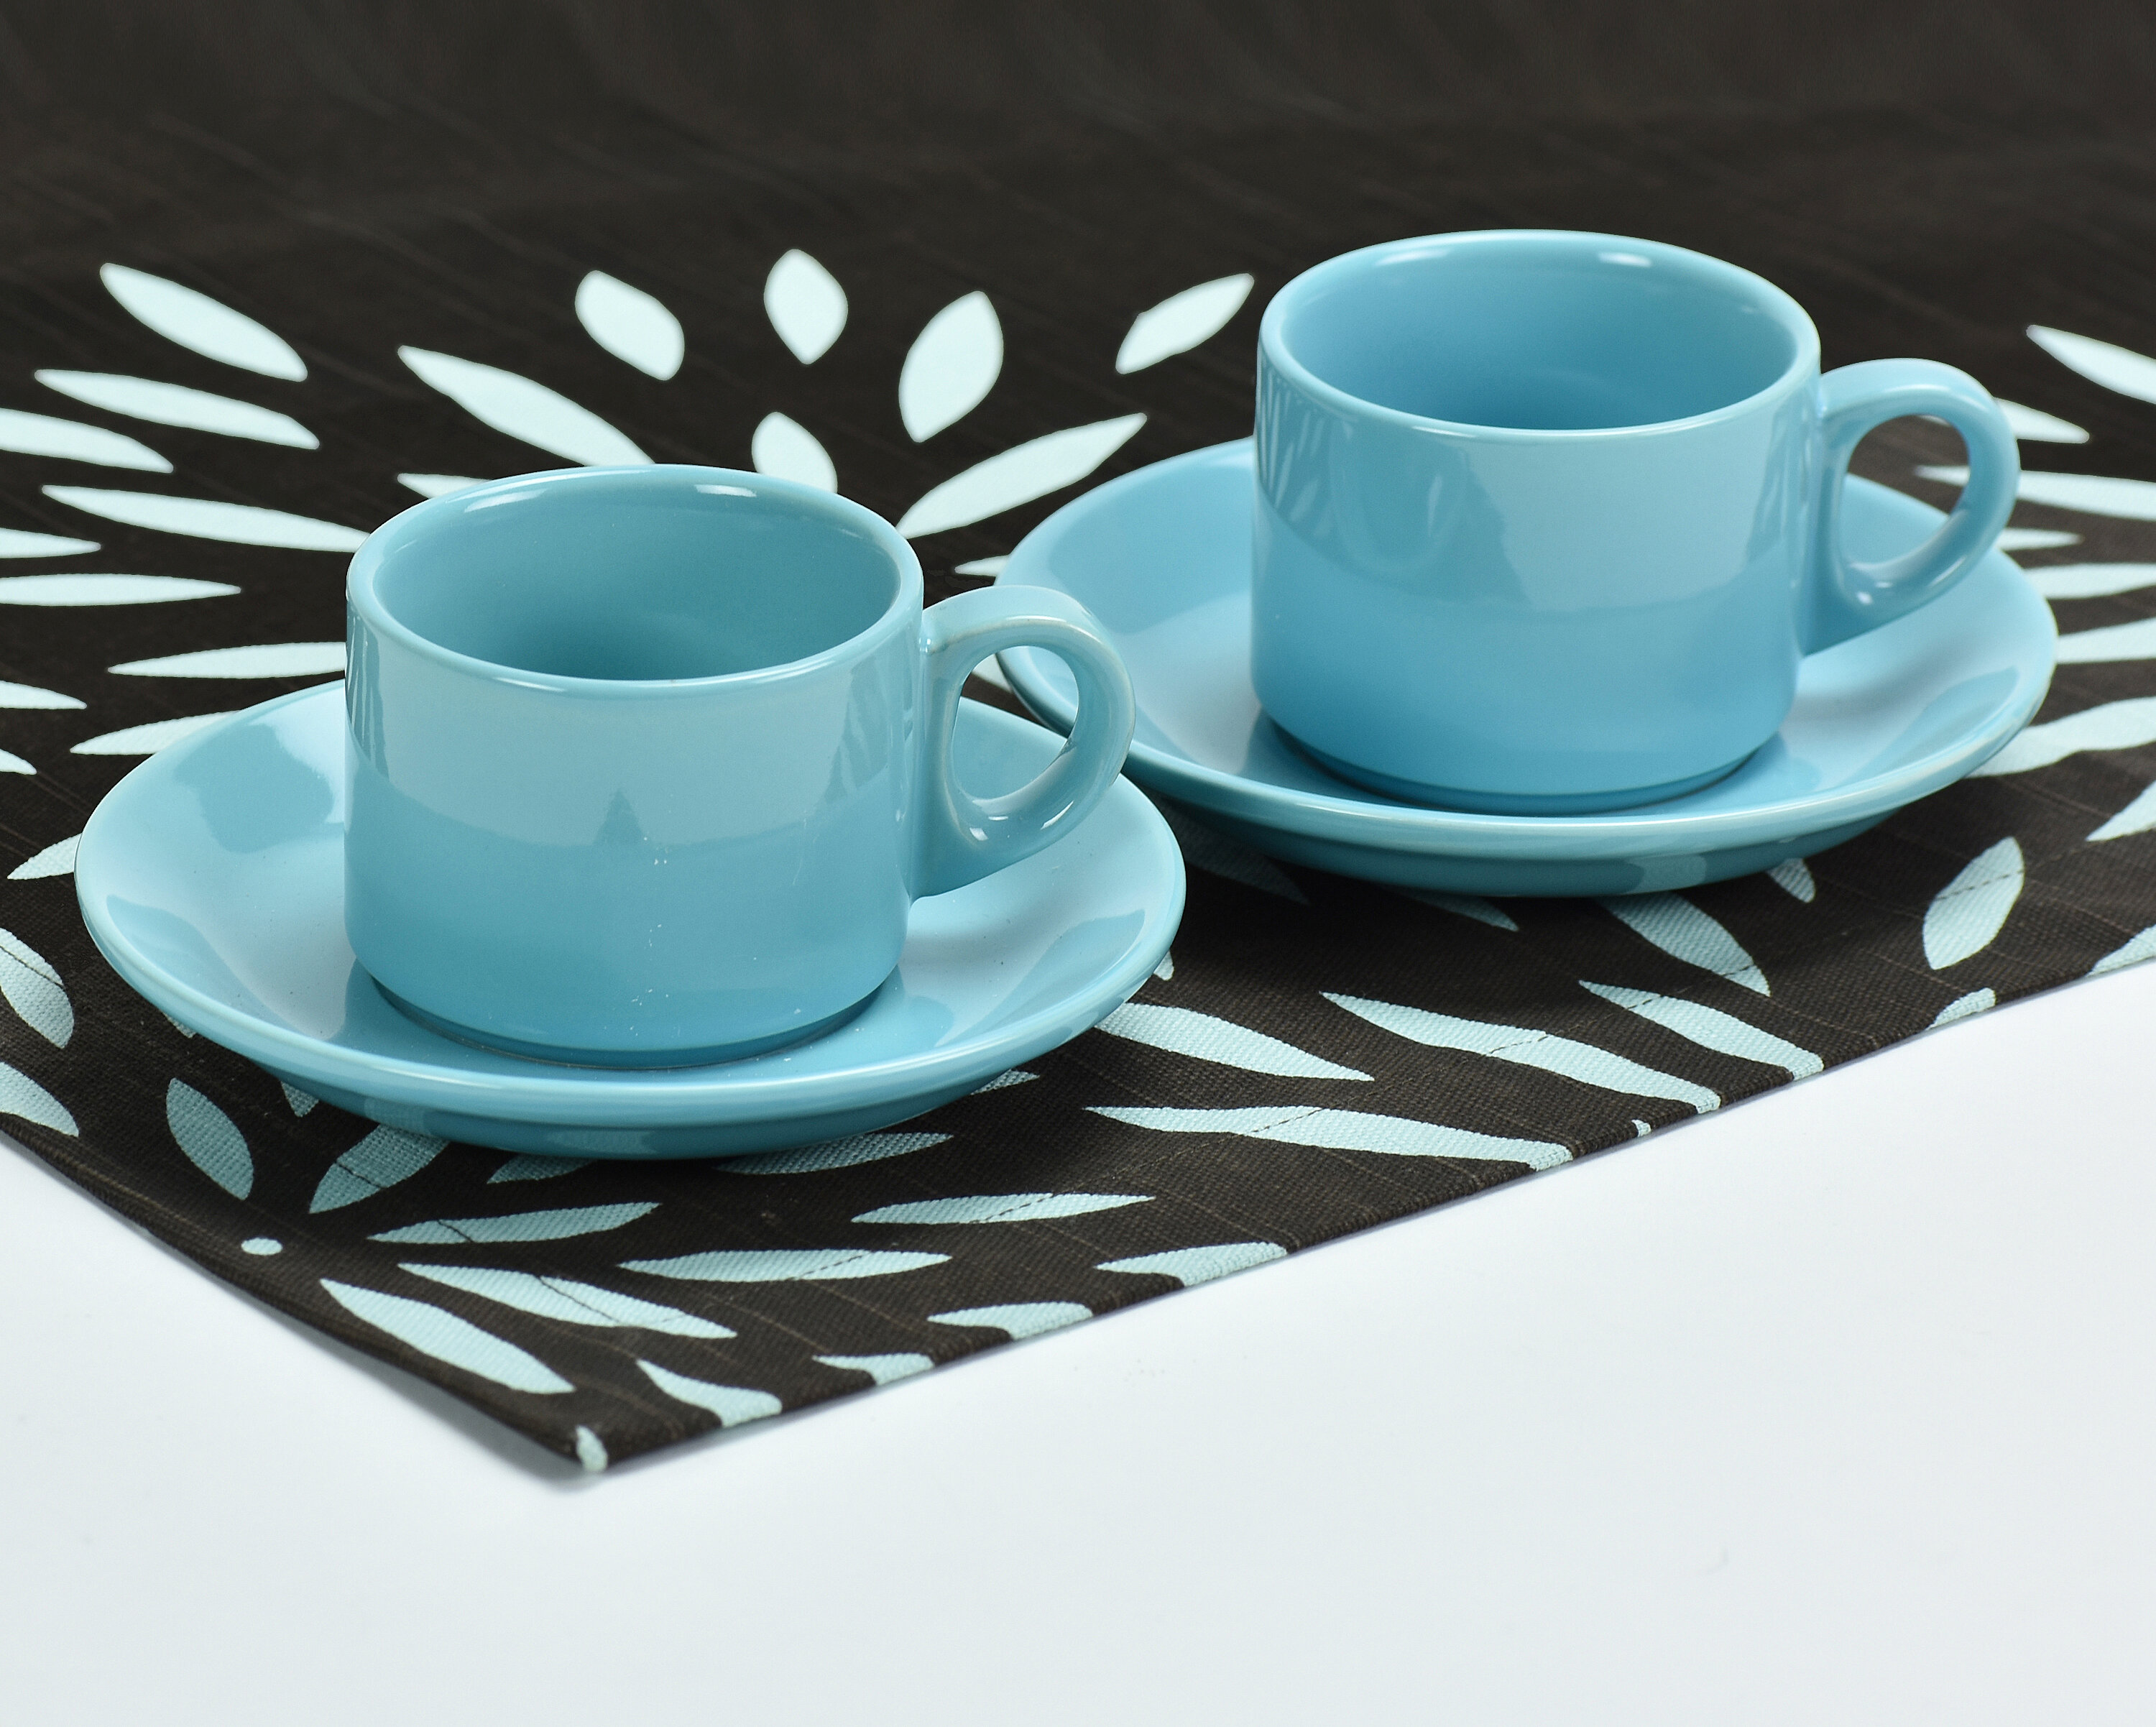 Colorful Espresso Cups Set with Matching Saucers (11 shades) - Black